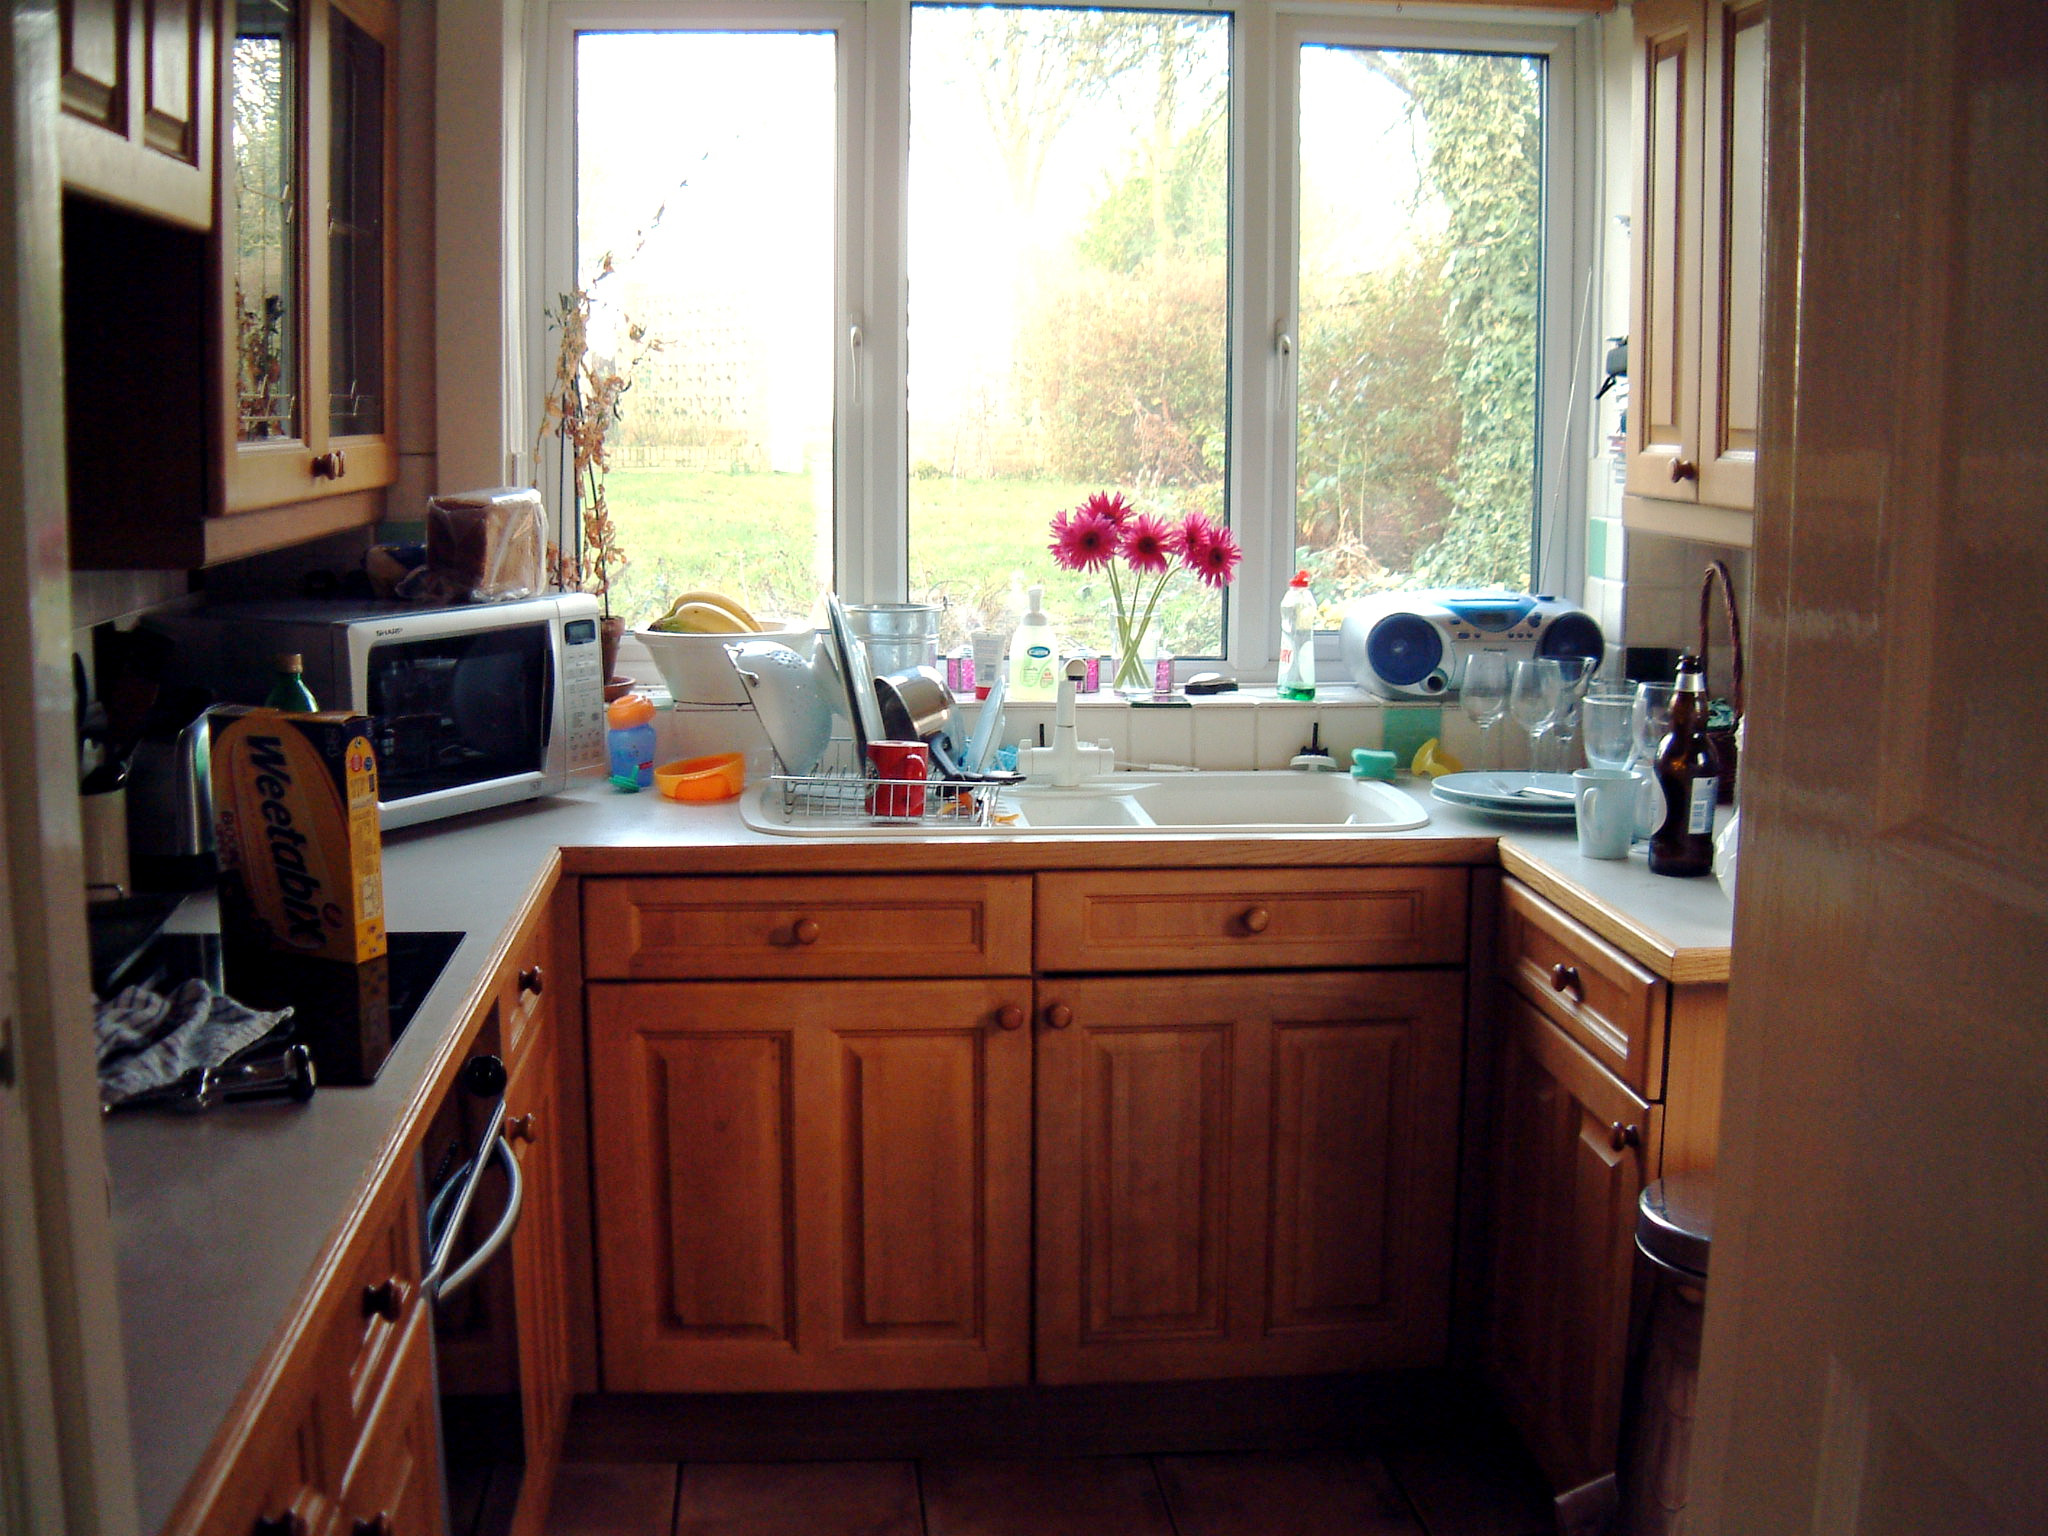 Small Kitchen Photos
 Space Saving Tips for Small Kitchens